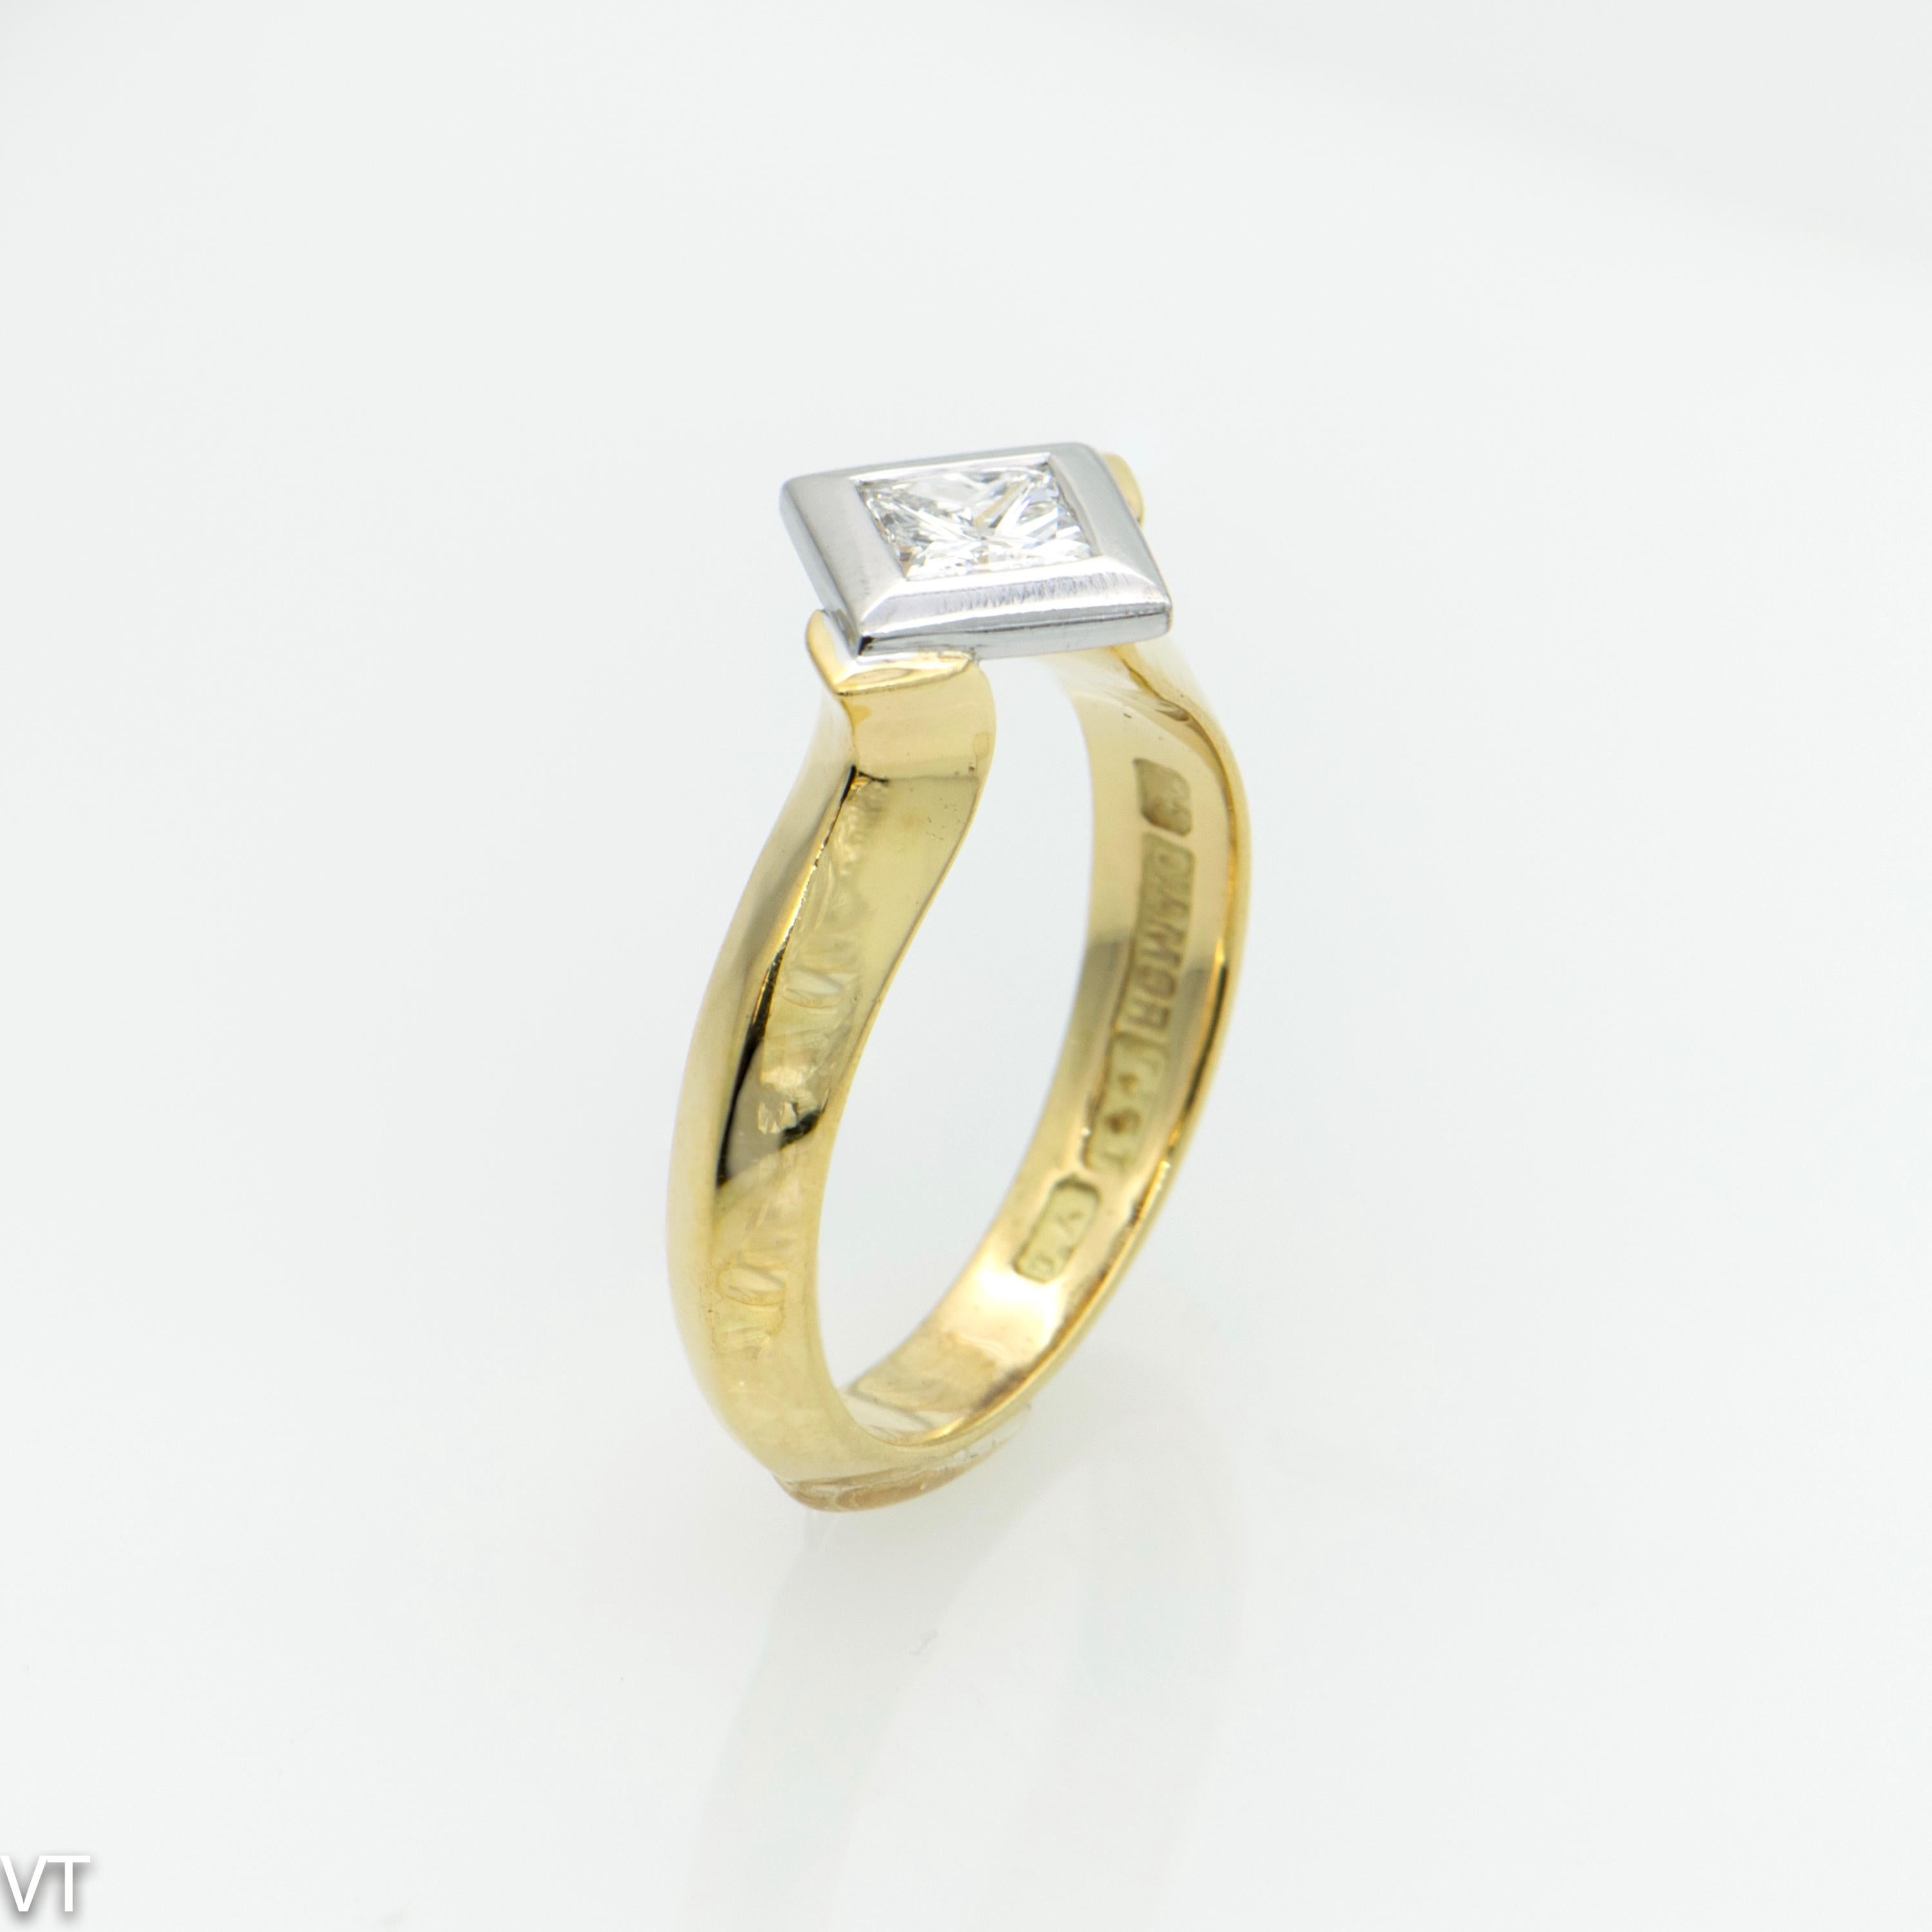 Bold and elegant 18 carat yellow gold engagement ring
with one princess-cut Diamond in 18 carat white gold Rub-over setting .
Stylish knife-edge band.
Diamond size is 0.52 carats, Colour H and Clarity VS.
Ring Size is M (US size 6 1/4)
Weight of the